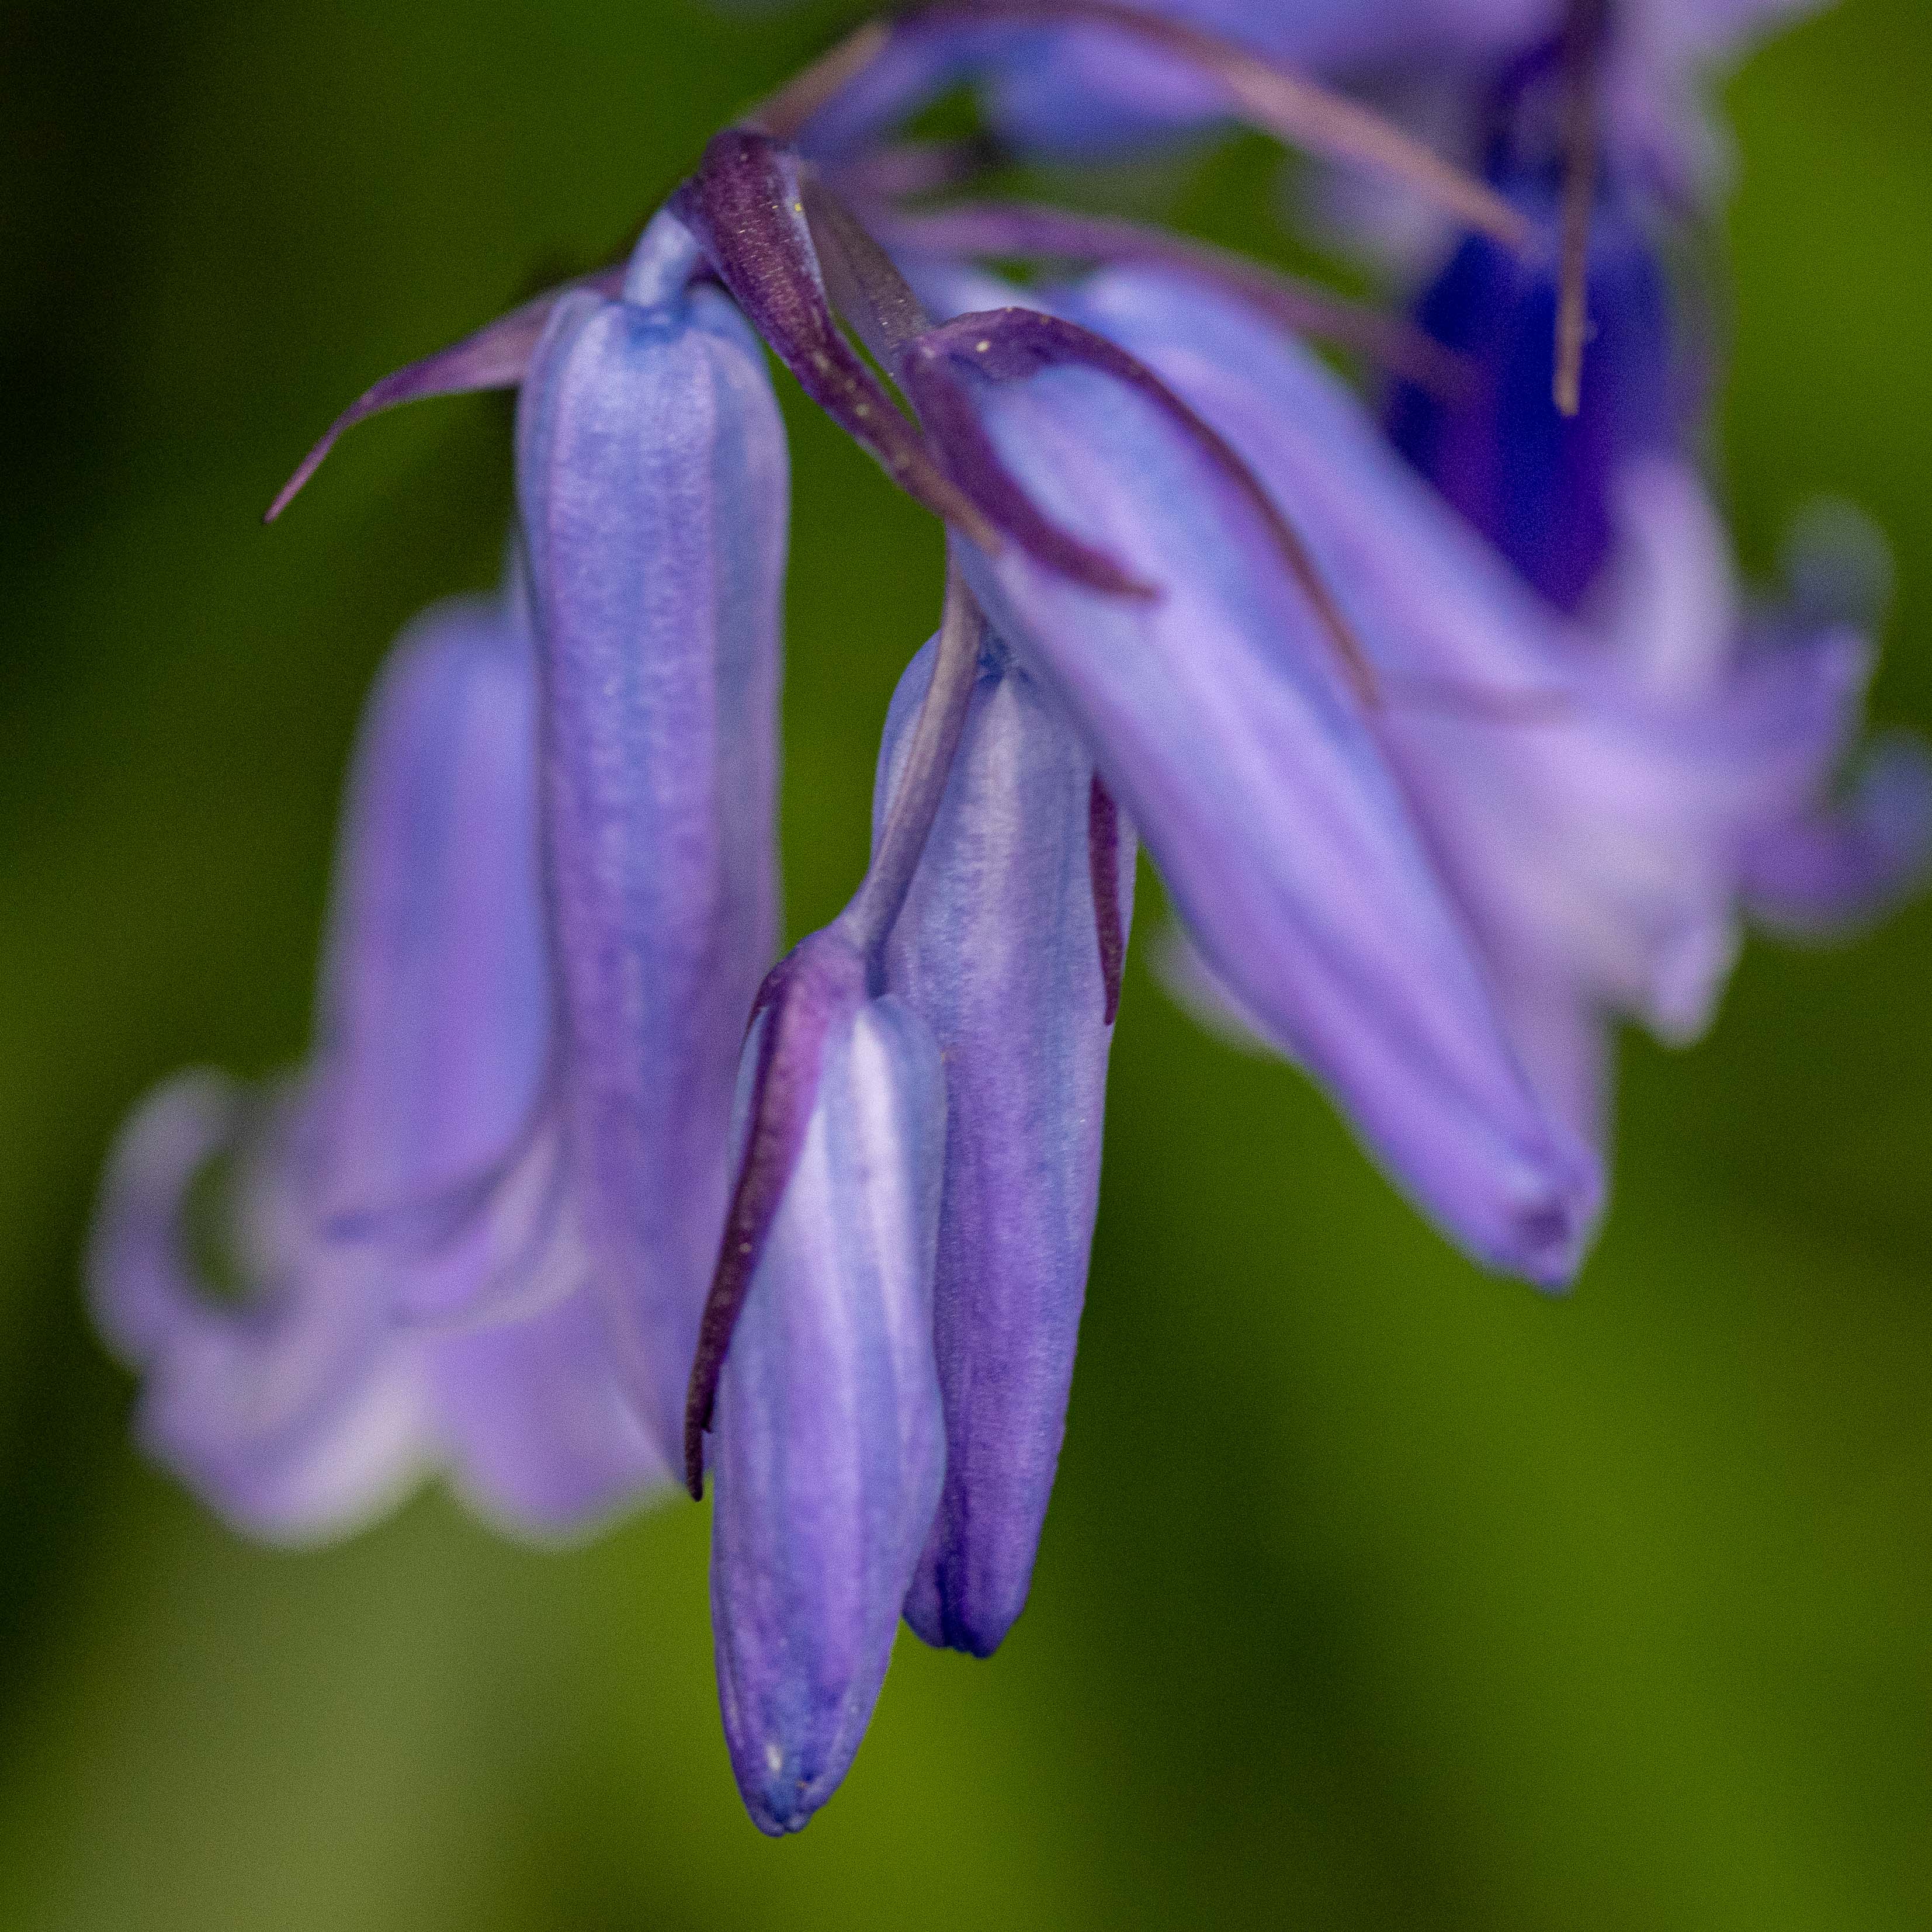 Another Bluebell